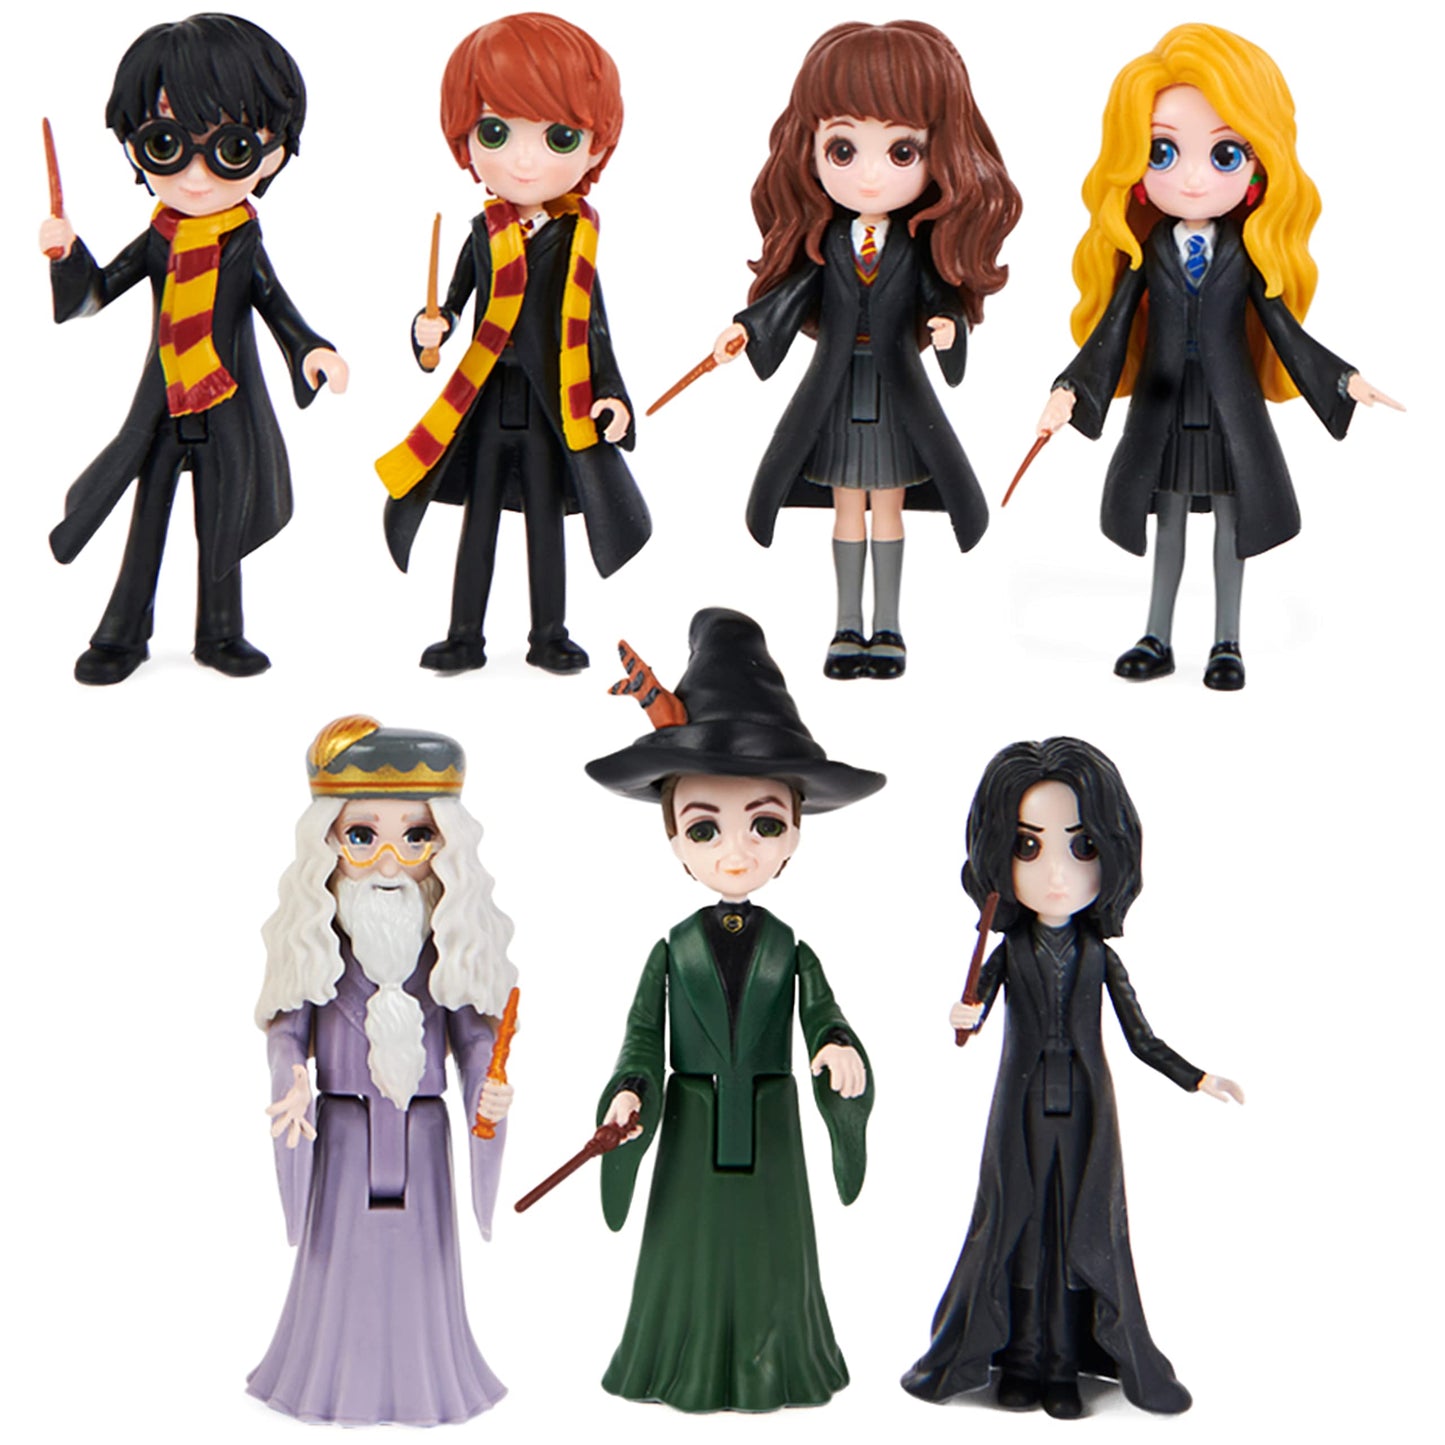 Wizarding World Harry Potter, Magical Minis Collectible 3-inch Harry Potter Figure, Kids Toys for Ages 6 and up